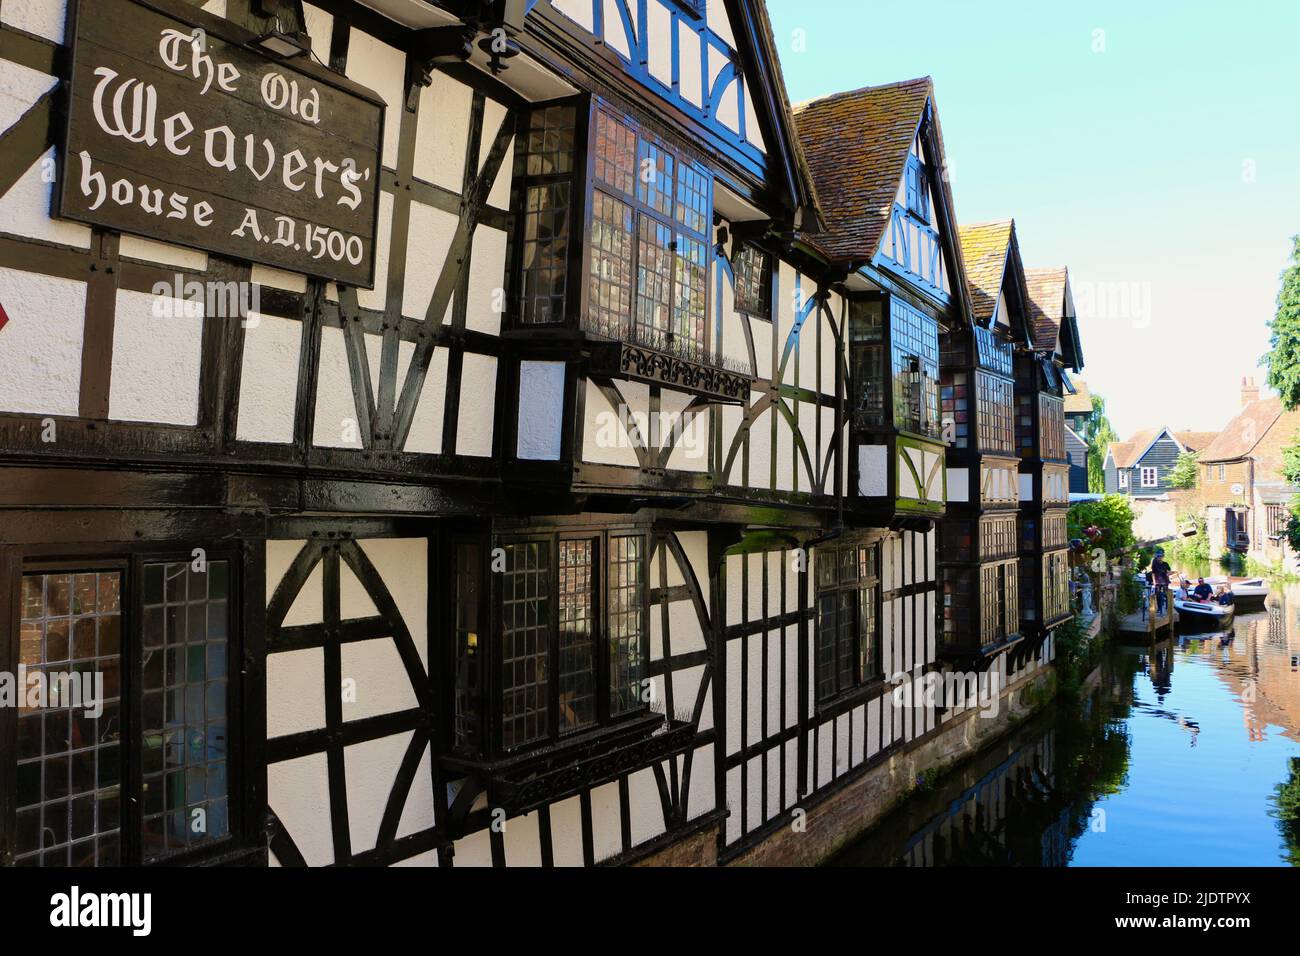 The Old Weavers' House A.D. 1500 restaurant on the River Stour Canterbury Kent England UK Stock Photo